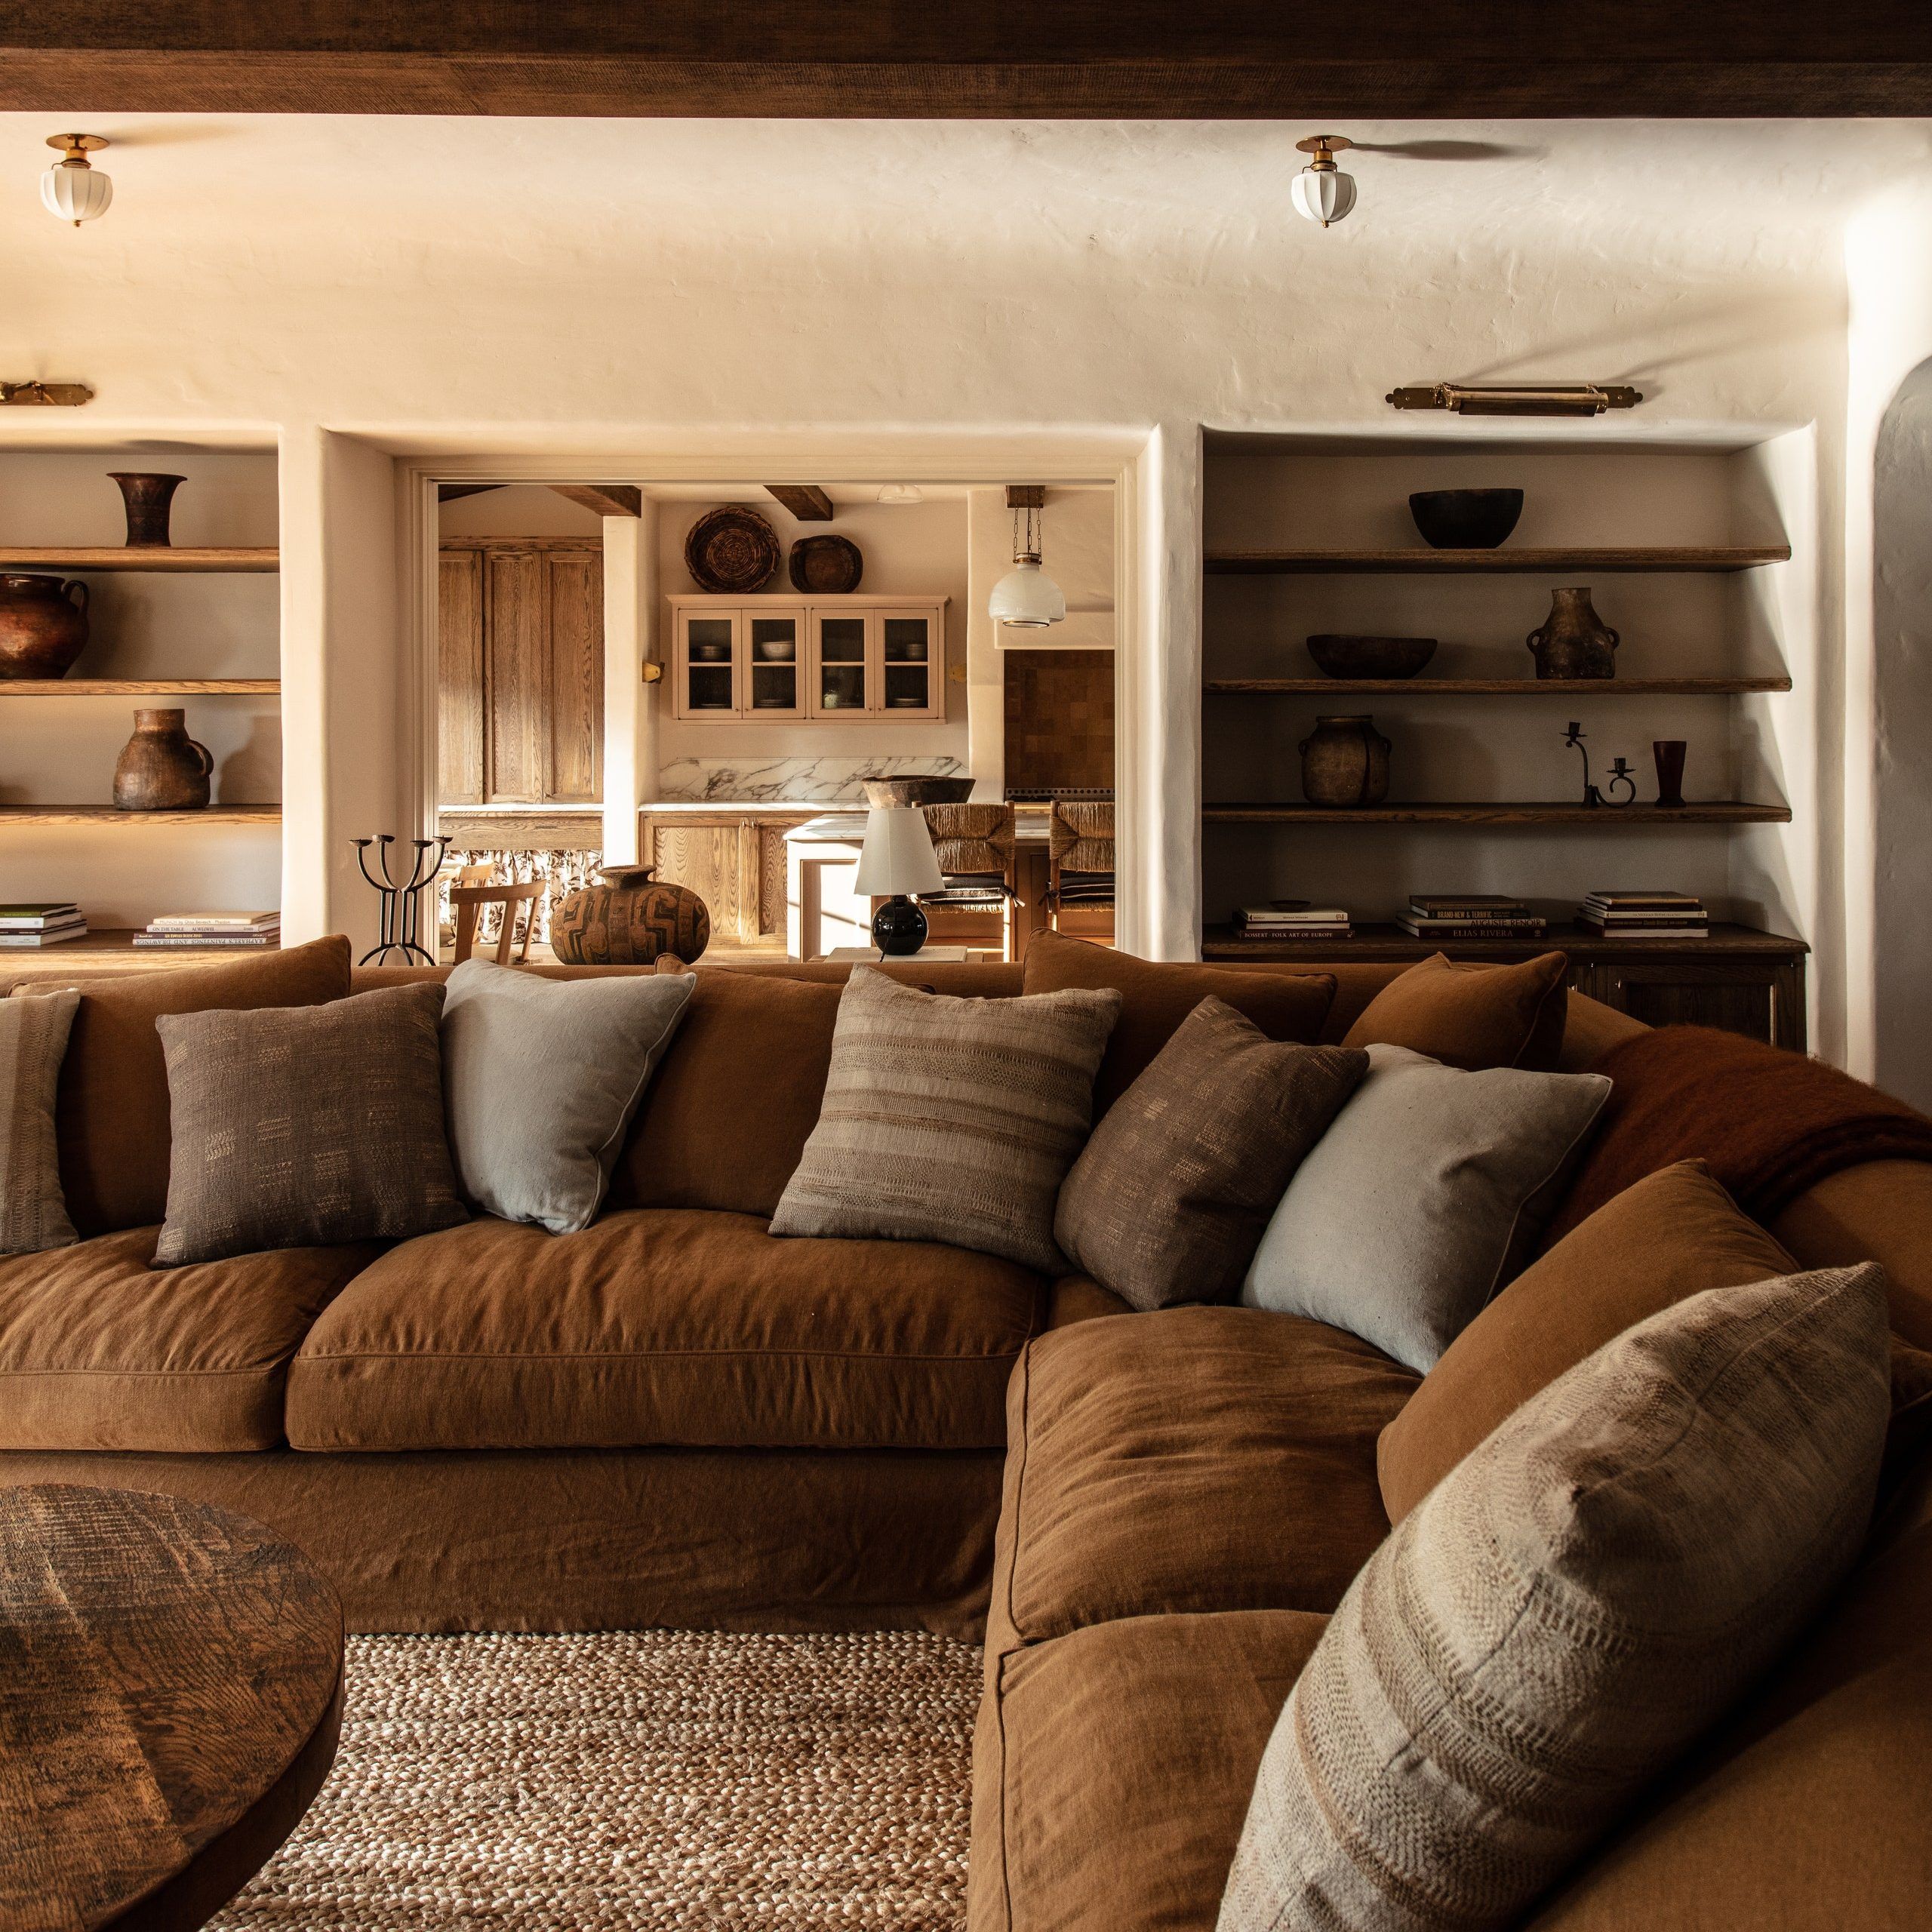 Why Brown Is The Home Decor Color Of 2022 | Vogue In Sofas In Chocolate Brown (View 10 of 15)